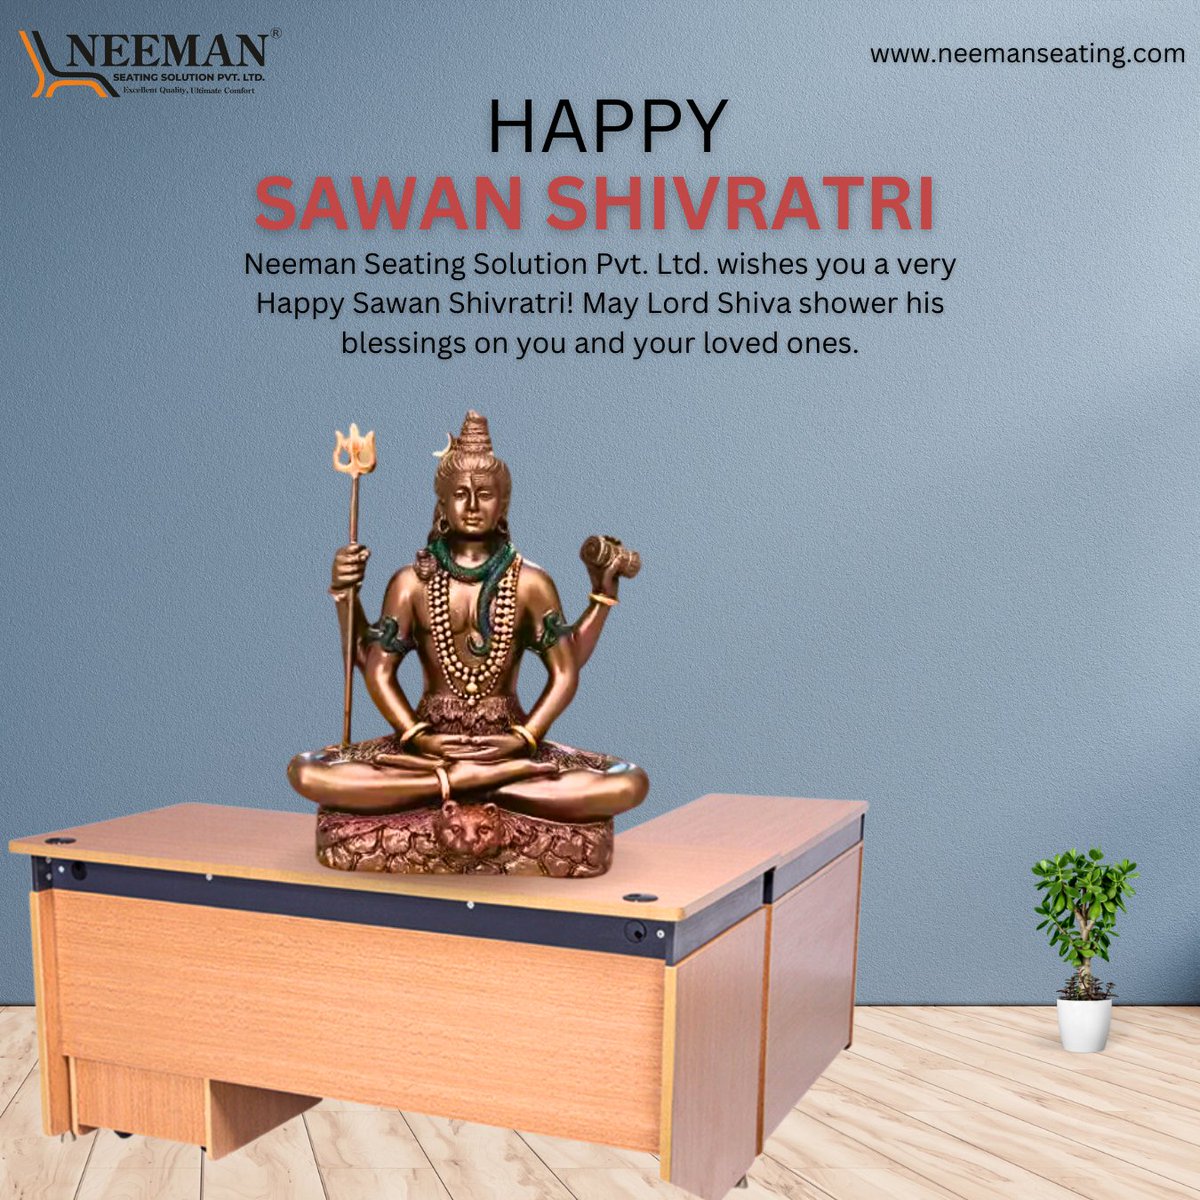 Neeman Seating Solution Pvt. Ltd. wishes you a very Happy Sawan Shivratri! May Lord Shiva shower his blessings on you and your loved ones. @Neemanfurniture

#shivratri #sawanshivratri #mahadev #sawan #sawanshivratri2023 #furnituremanufacturing #1furniture